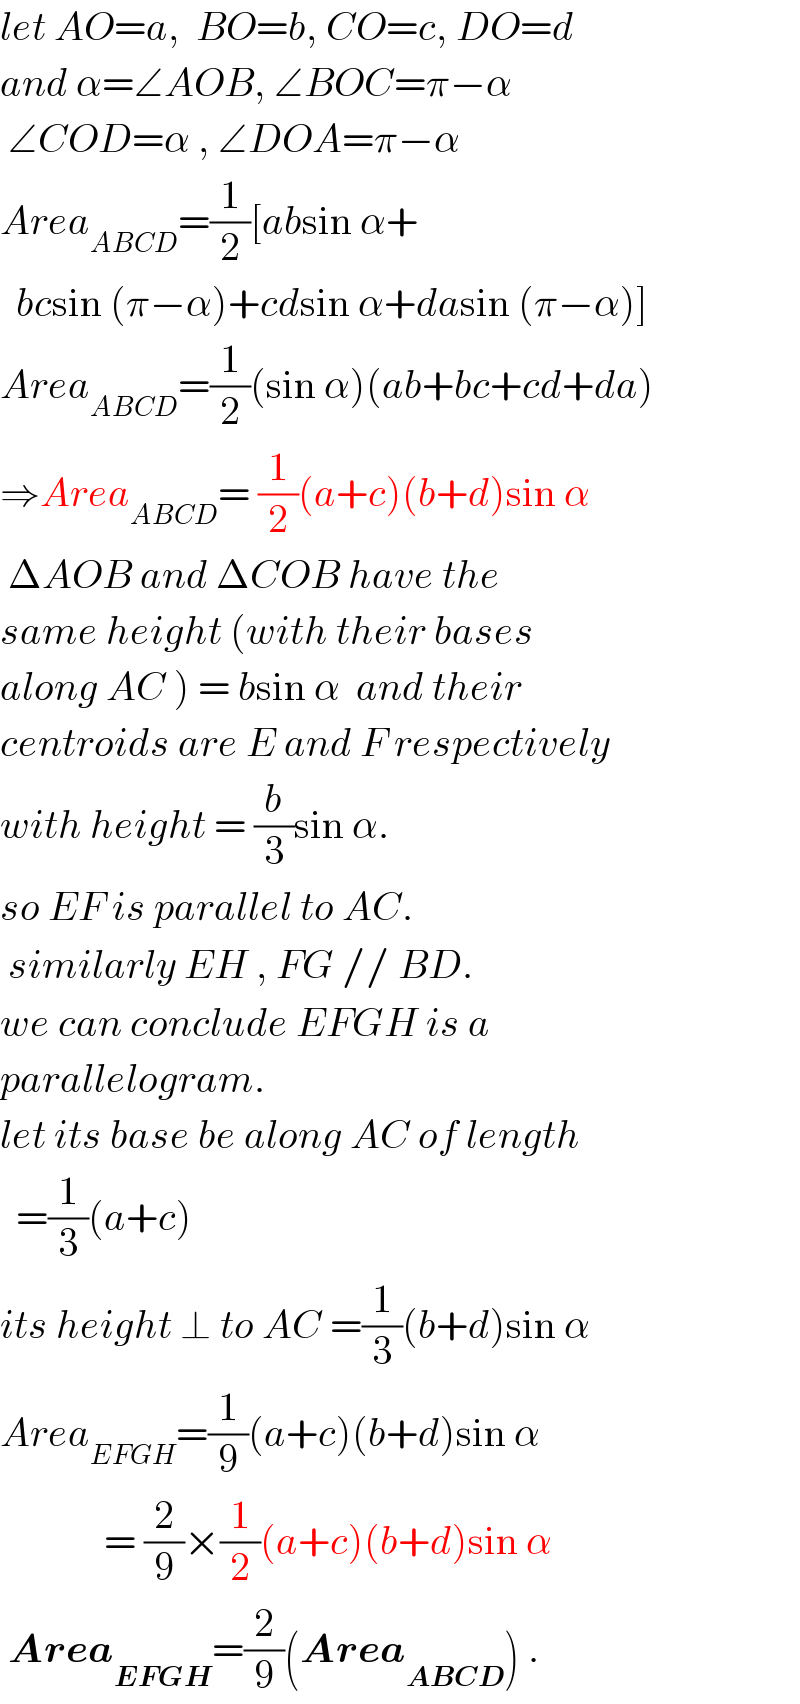 let AO=a,  BO=b, CO=c, DO=d  and α=∠AOB, ∠BOC=π−α   ∠COD=α , ∠DOA=π−α  Area_(ABCD) =(1/2)[absin α+    bcsin (π−α)+cdsin α+dasin (π−α)]  Area_(ABCD) =(1/2)(sin α)(ab+bc+cd+da)  ⇒Area_(ABCD) = (1/2)(a+c)(b+d)sin α   ΔAOB and ΔCOB have the  same height (with their bases  along AC ) = bsin α  and their  centroids are E and F respectively  with height = (b/3)sin α.  so EF is parallel to AC.   similarly EH , FG // BD.  we can conclude EFGH is a   parallelogram.  let its base be along AC of length    =(1/3)(a+c)  its height ⊥ to AC =(1/3)(b+d)sin α  Area_(EFGH) =(1/9)(a+c)(b+d)sin α               = (2/9)×(1/2)(a+c)(b+d)sin α   Area_(EFGH) =(2/9)(Area_(ABCD) ) .  